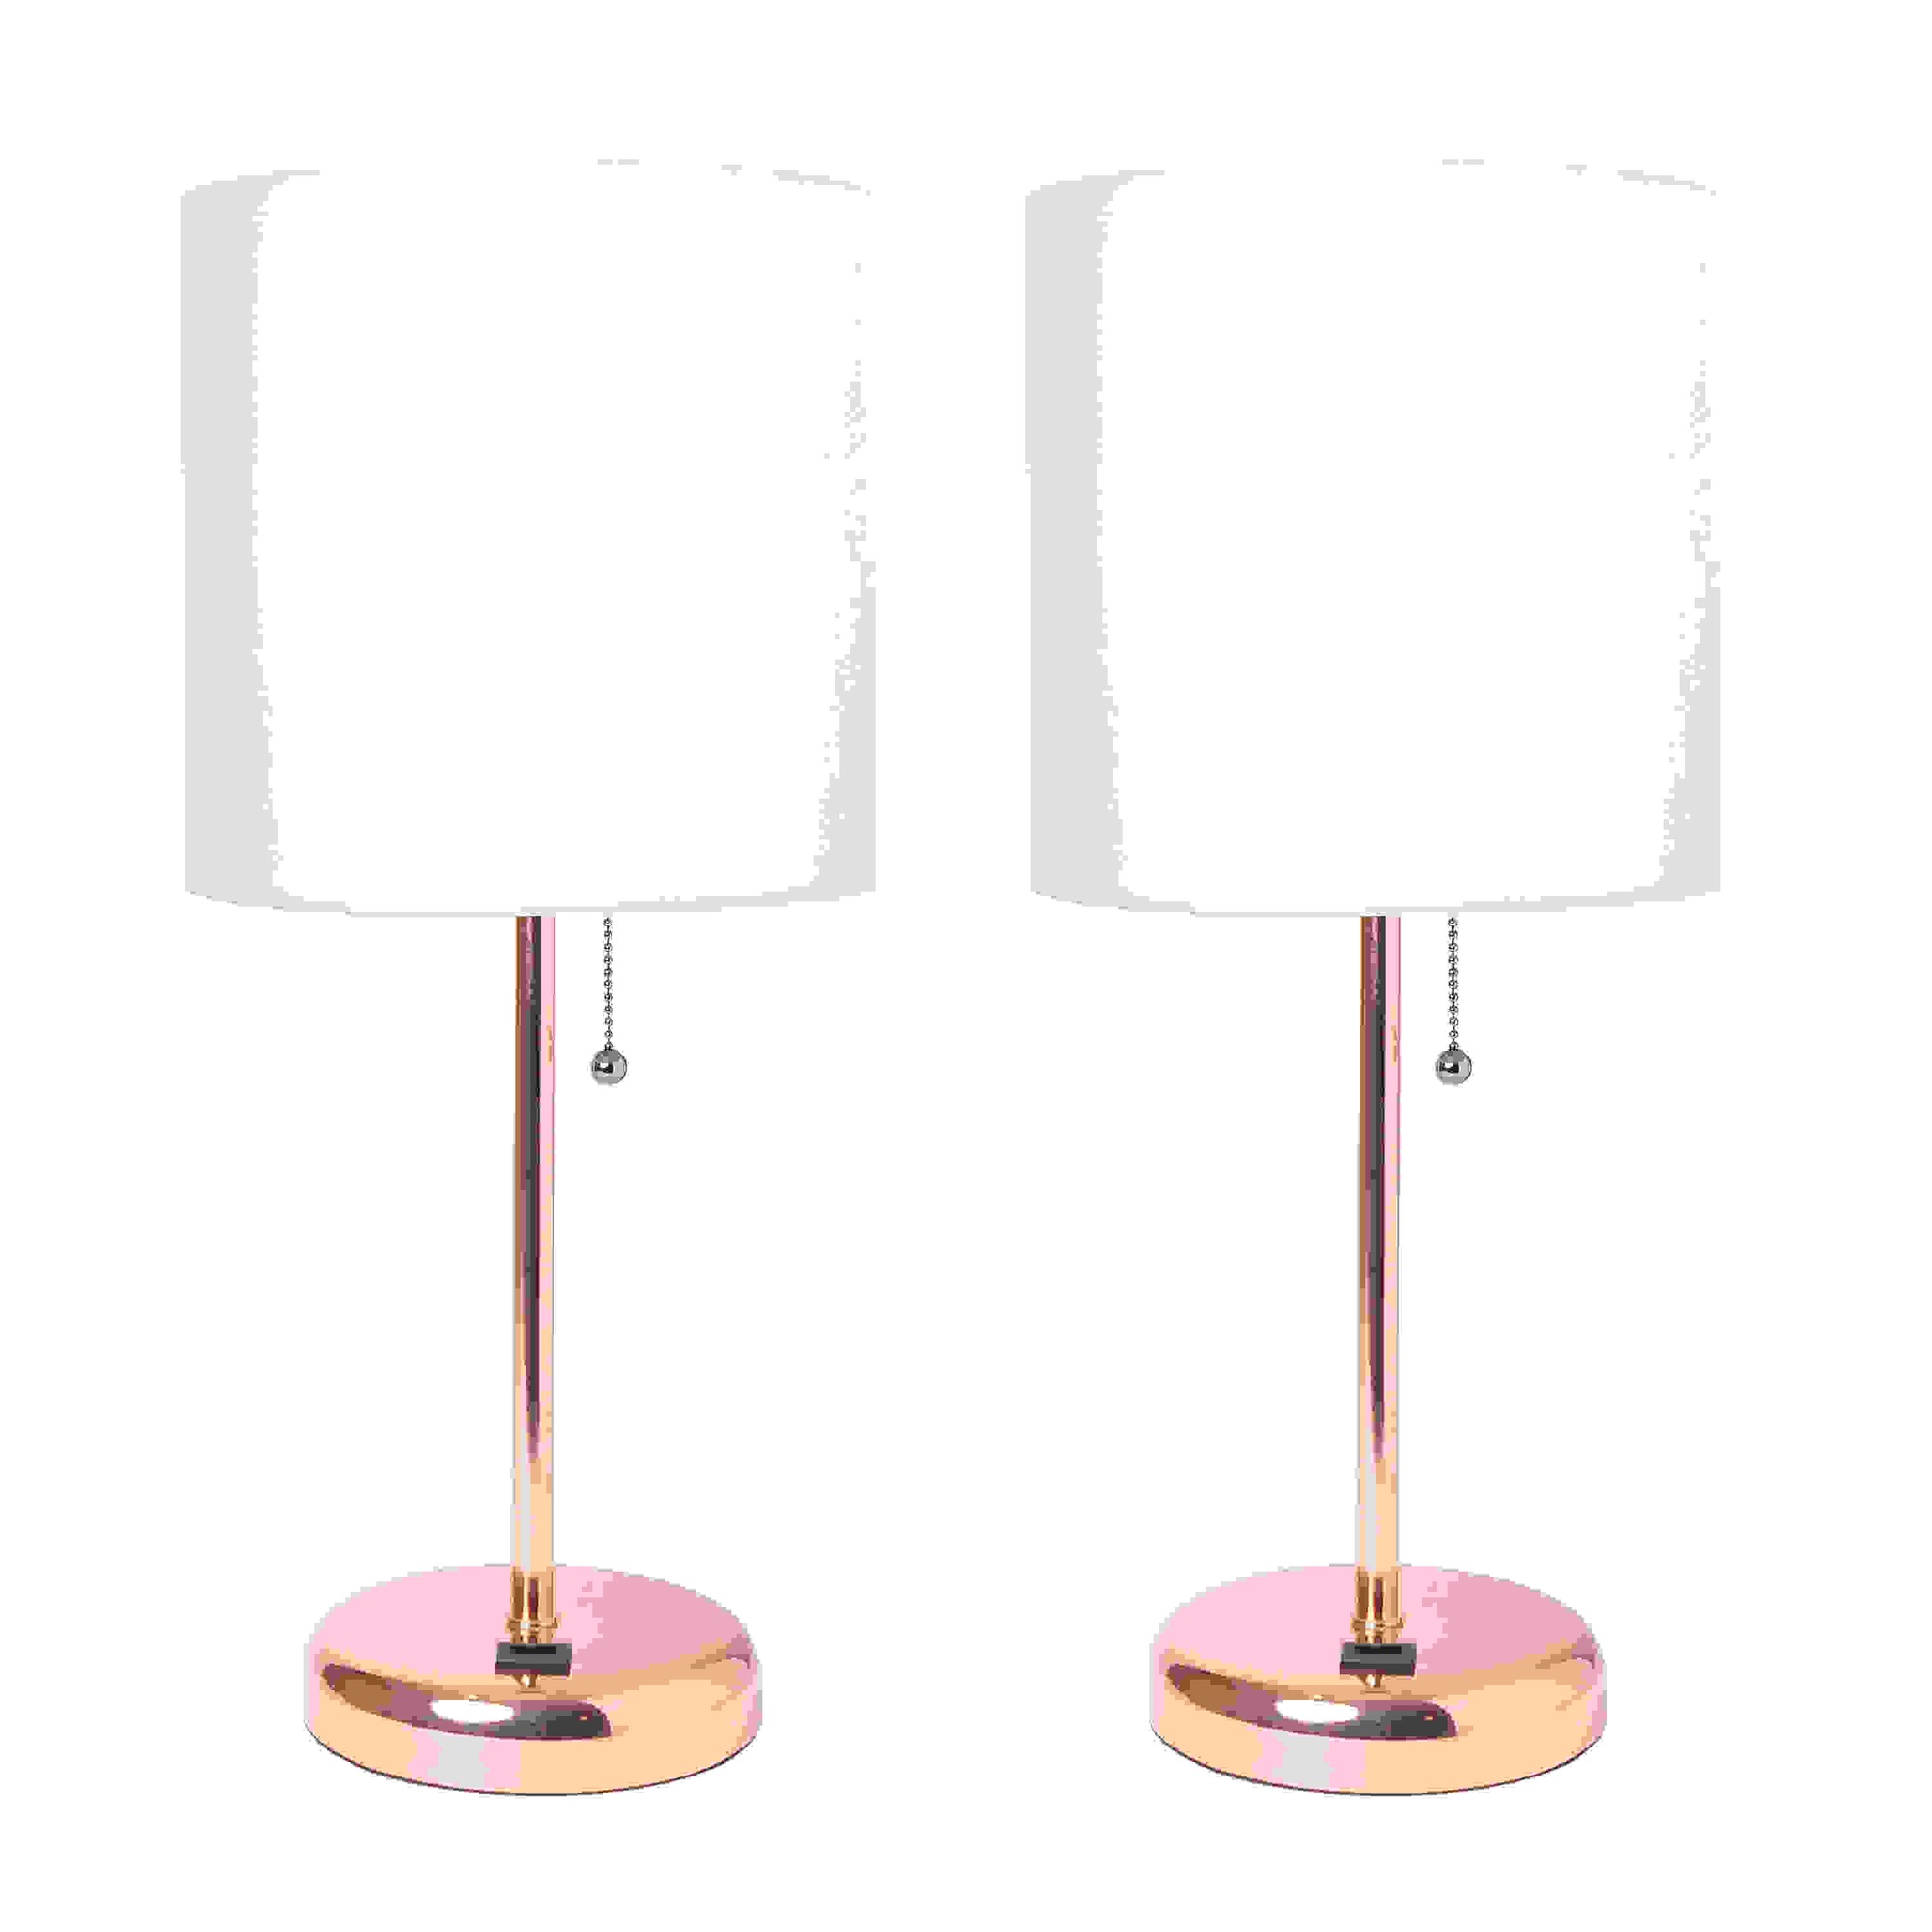 LimeLights Rose Gold Stick Lamp with USB charging port and Fabric Shade 2 Pack Set, White